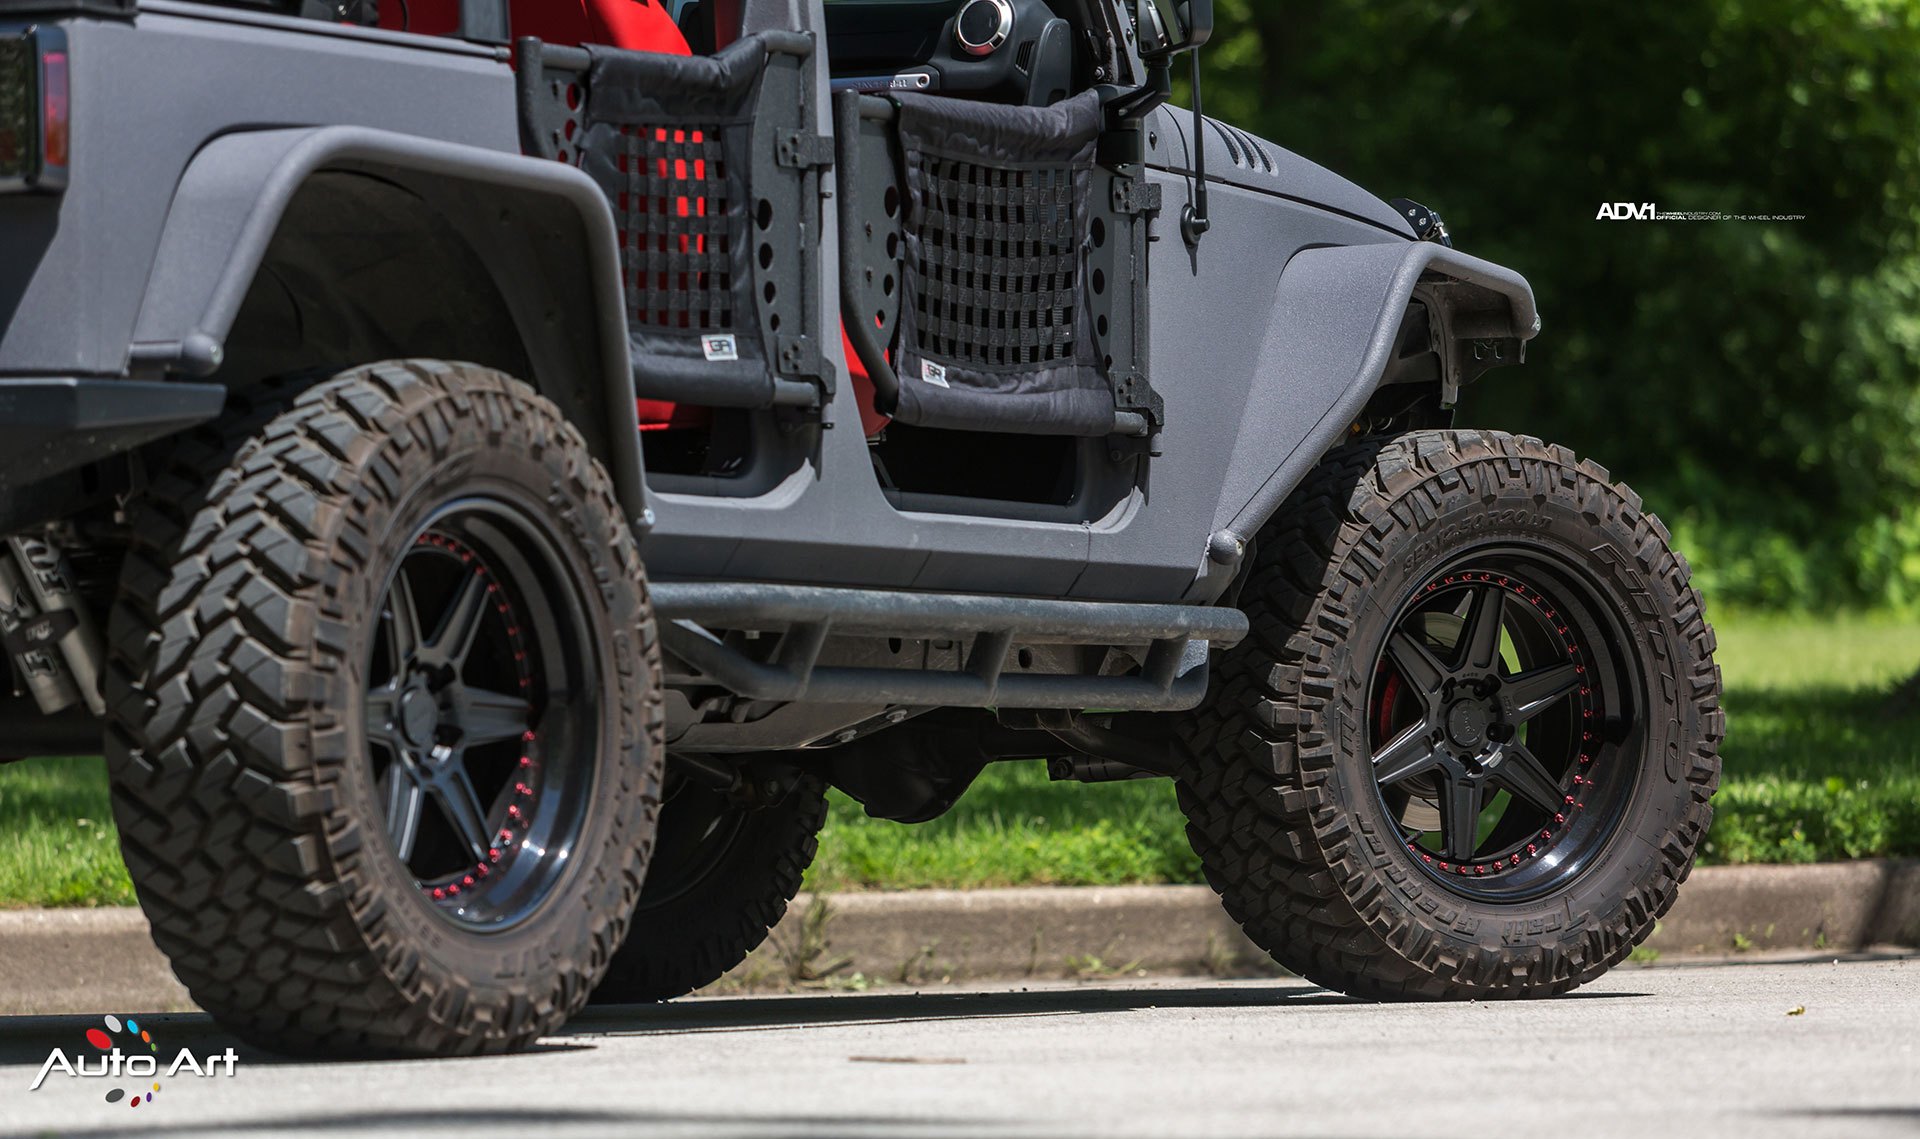 Gray Jeep Wrangler with Wide Fender Flares - Photo by ADV.1